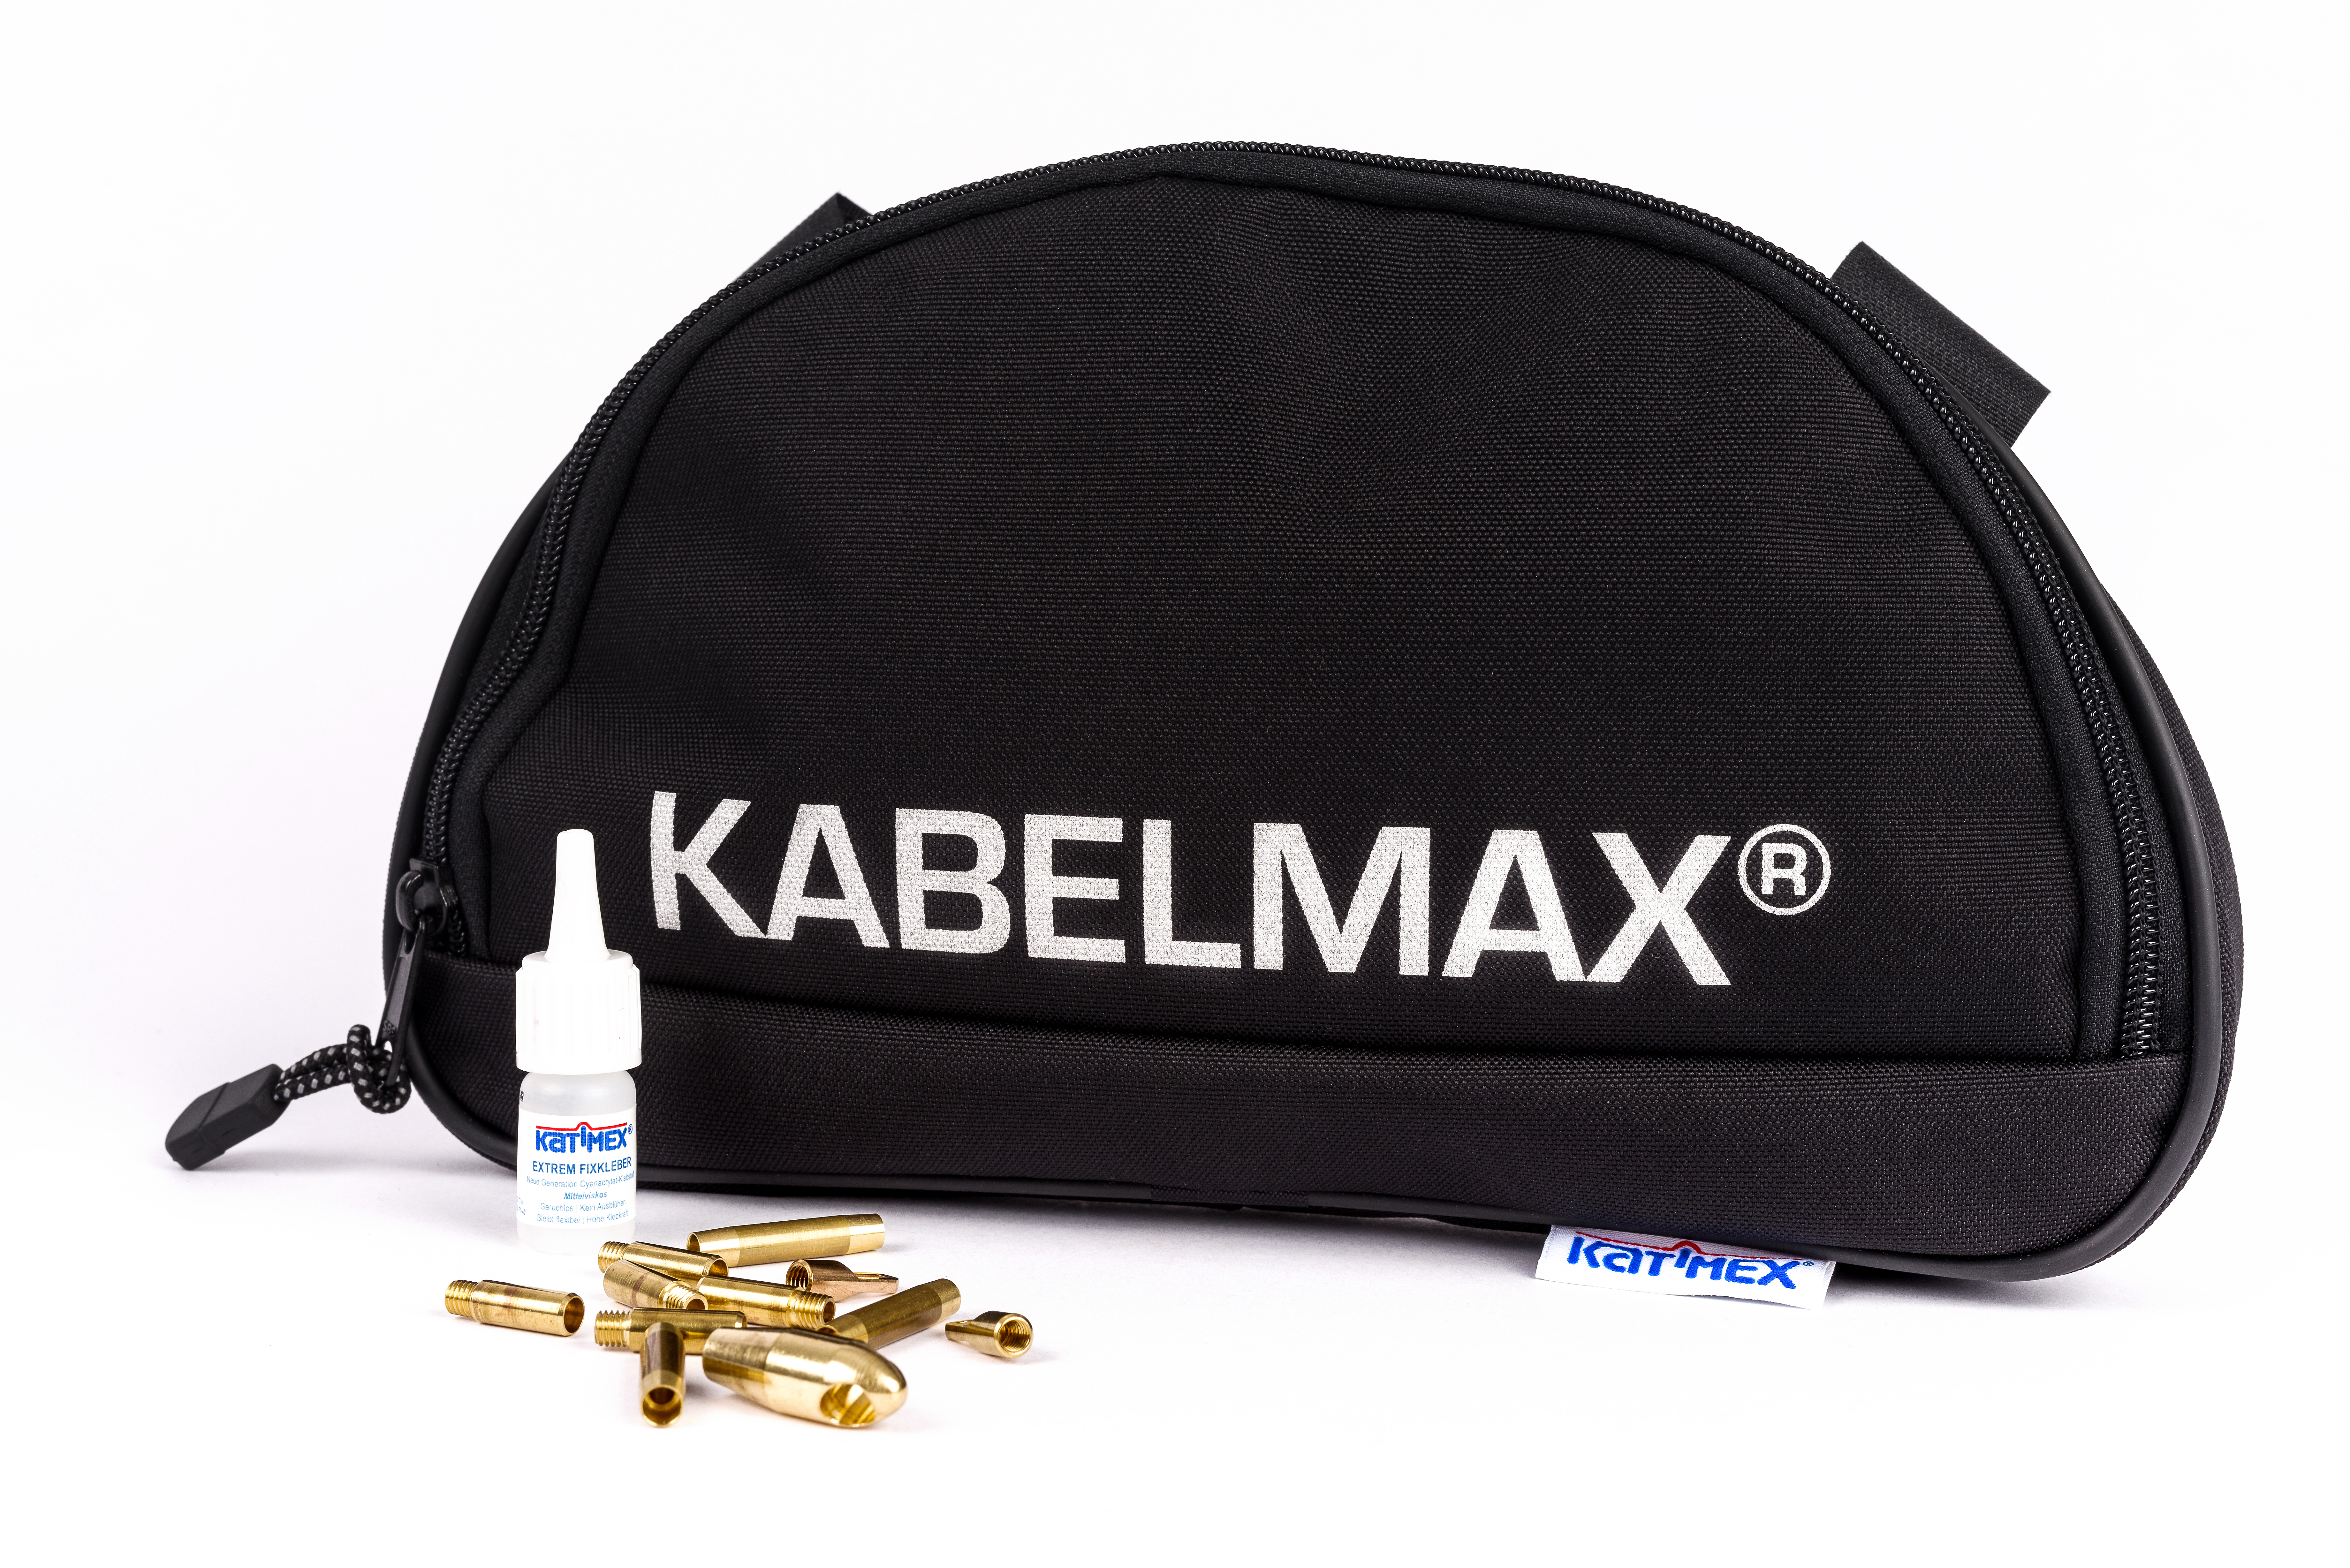 cablemax-service-bag-with-service-set